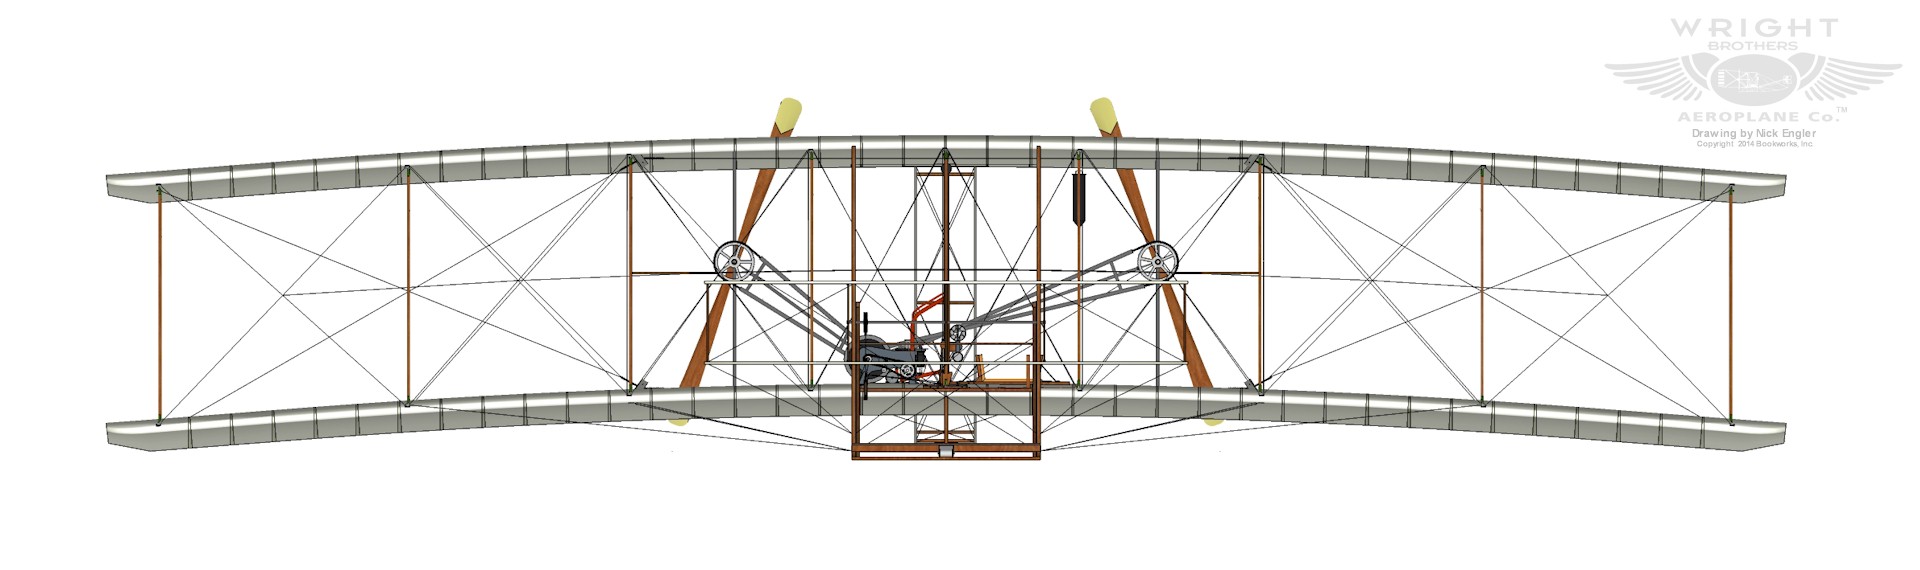 wright flyer clipart - photo #19